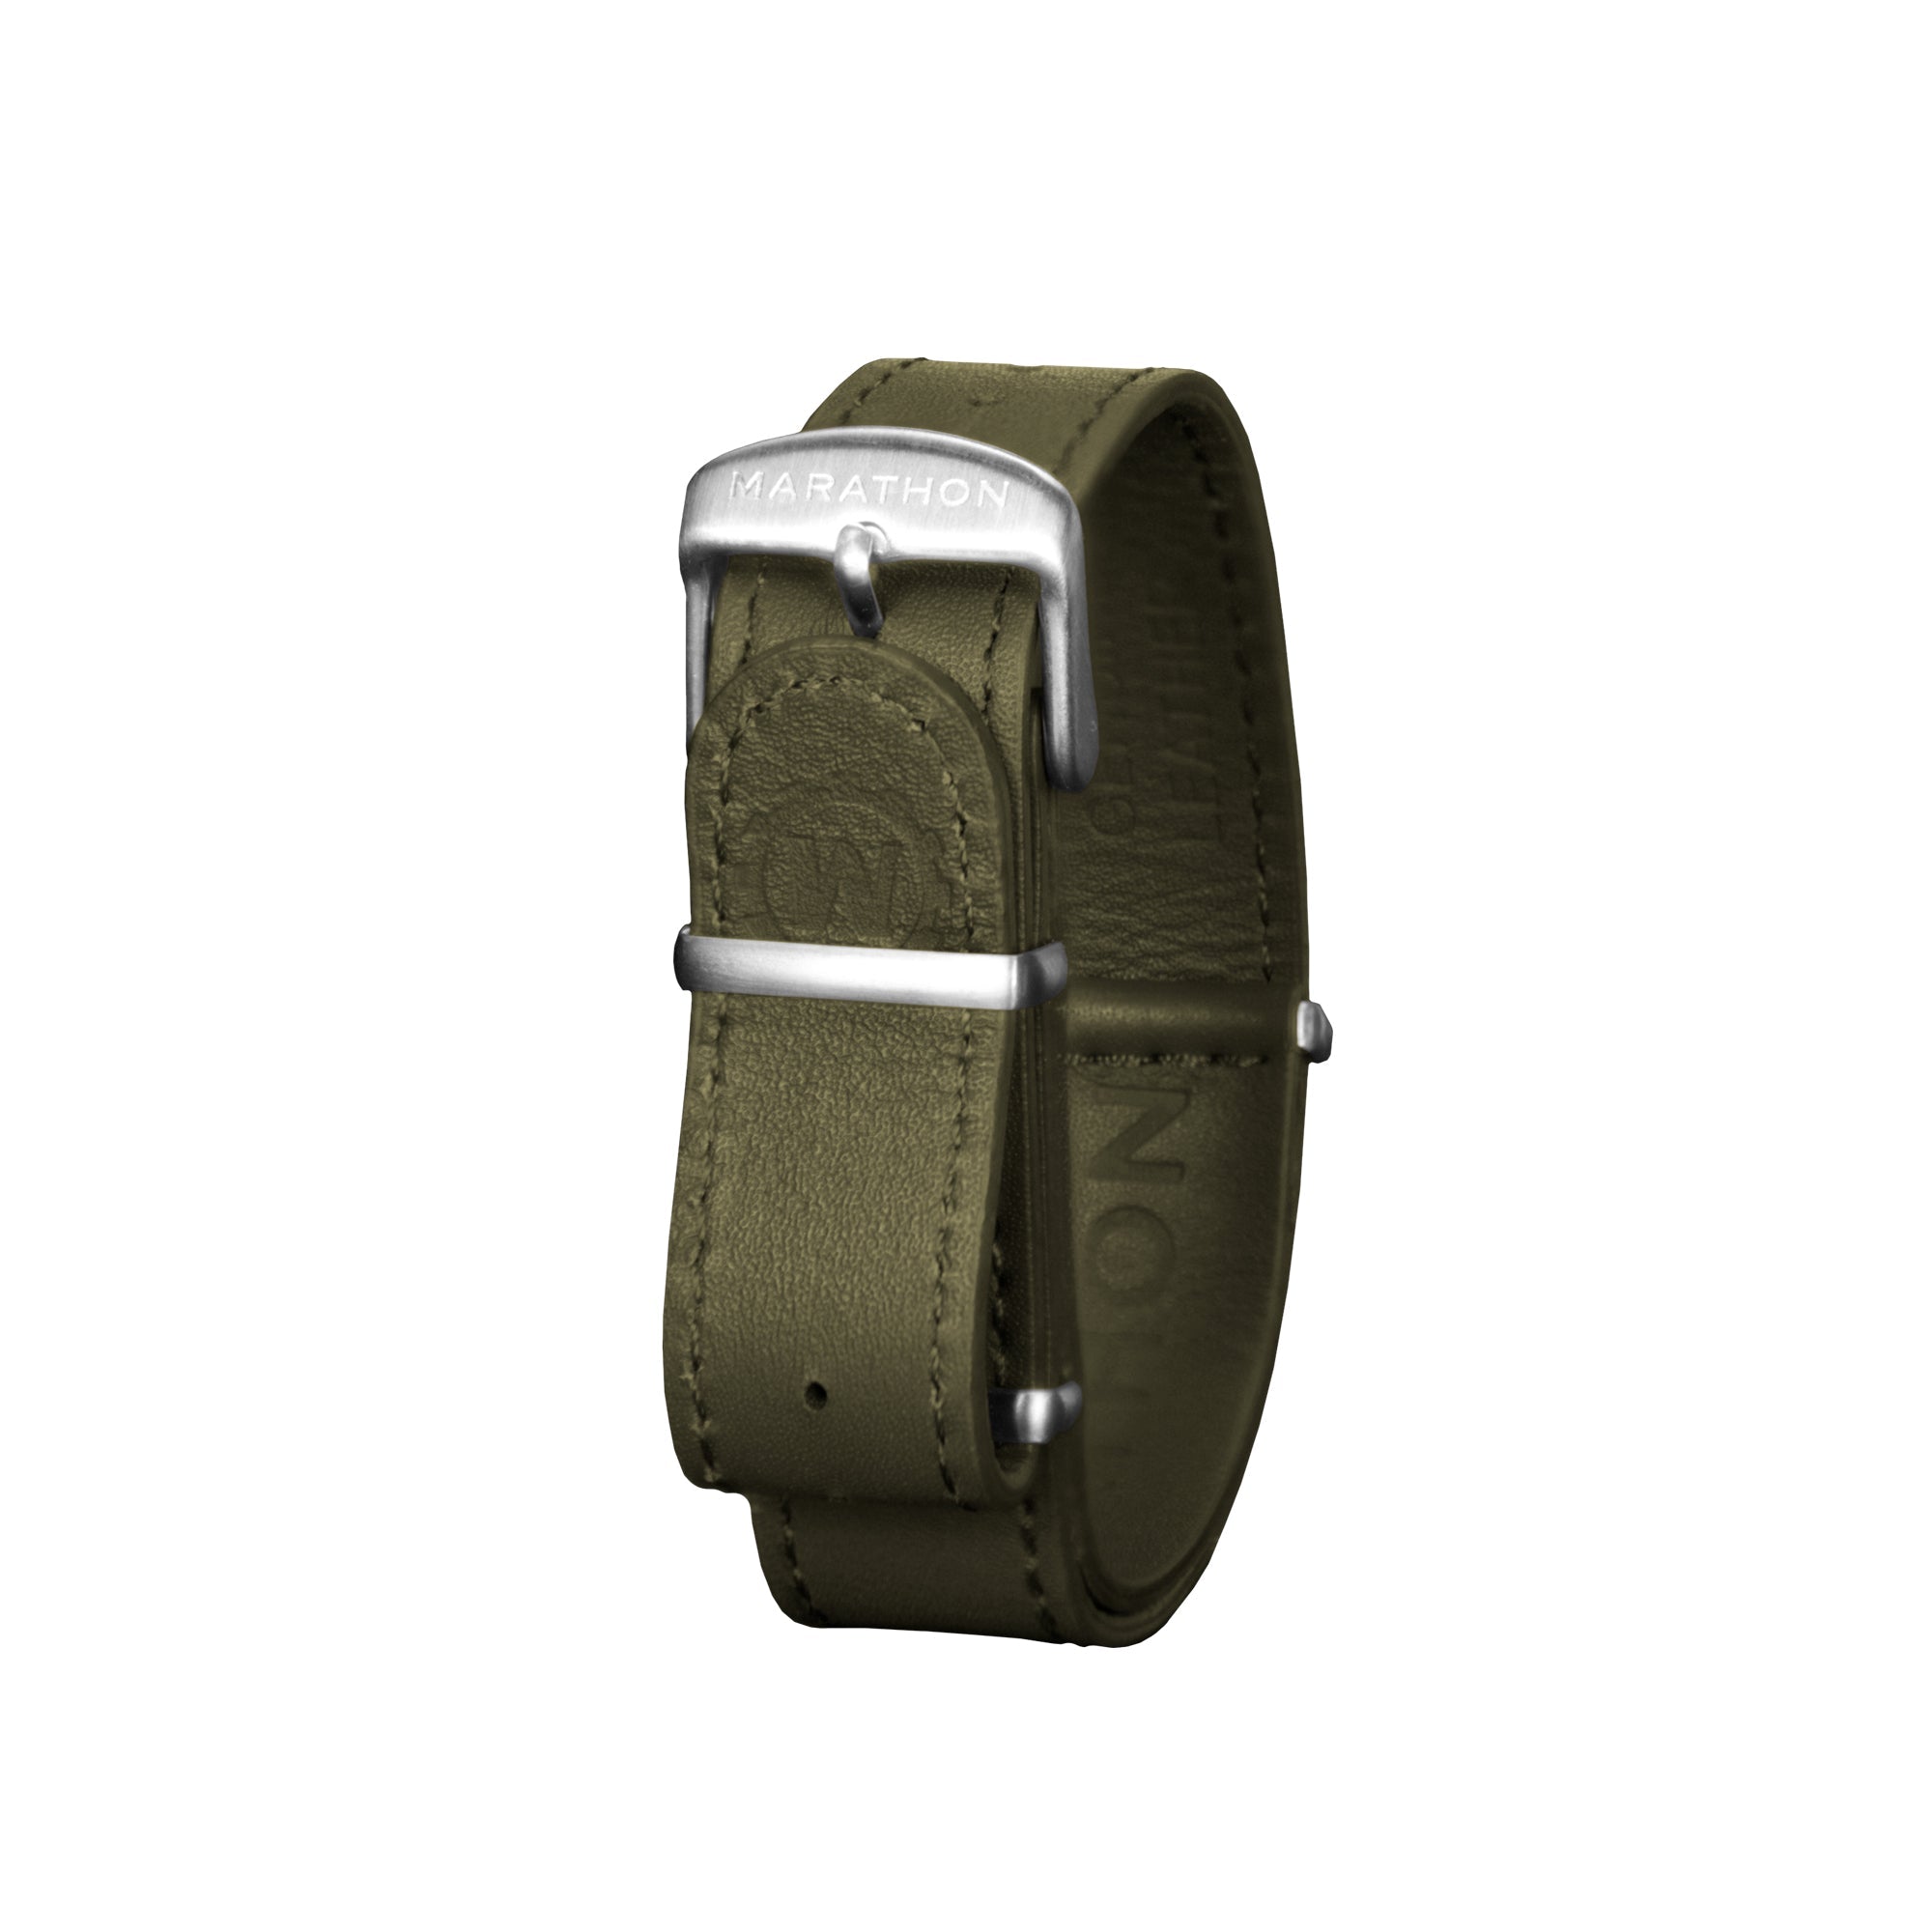 Olive Green & Tan Paracord Watch Band Strap Lug size 22mm, 24mm